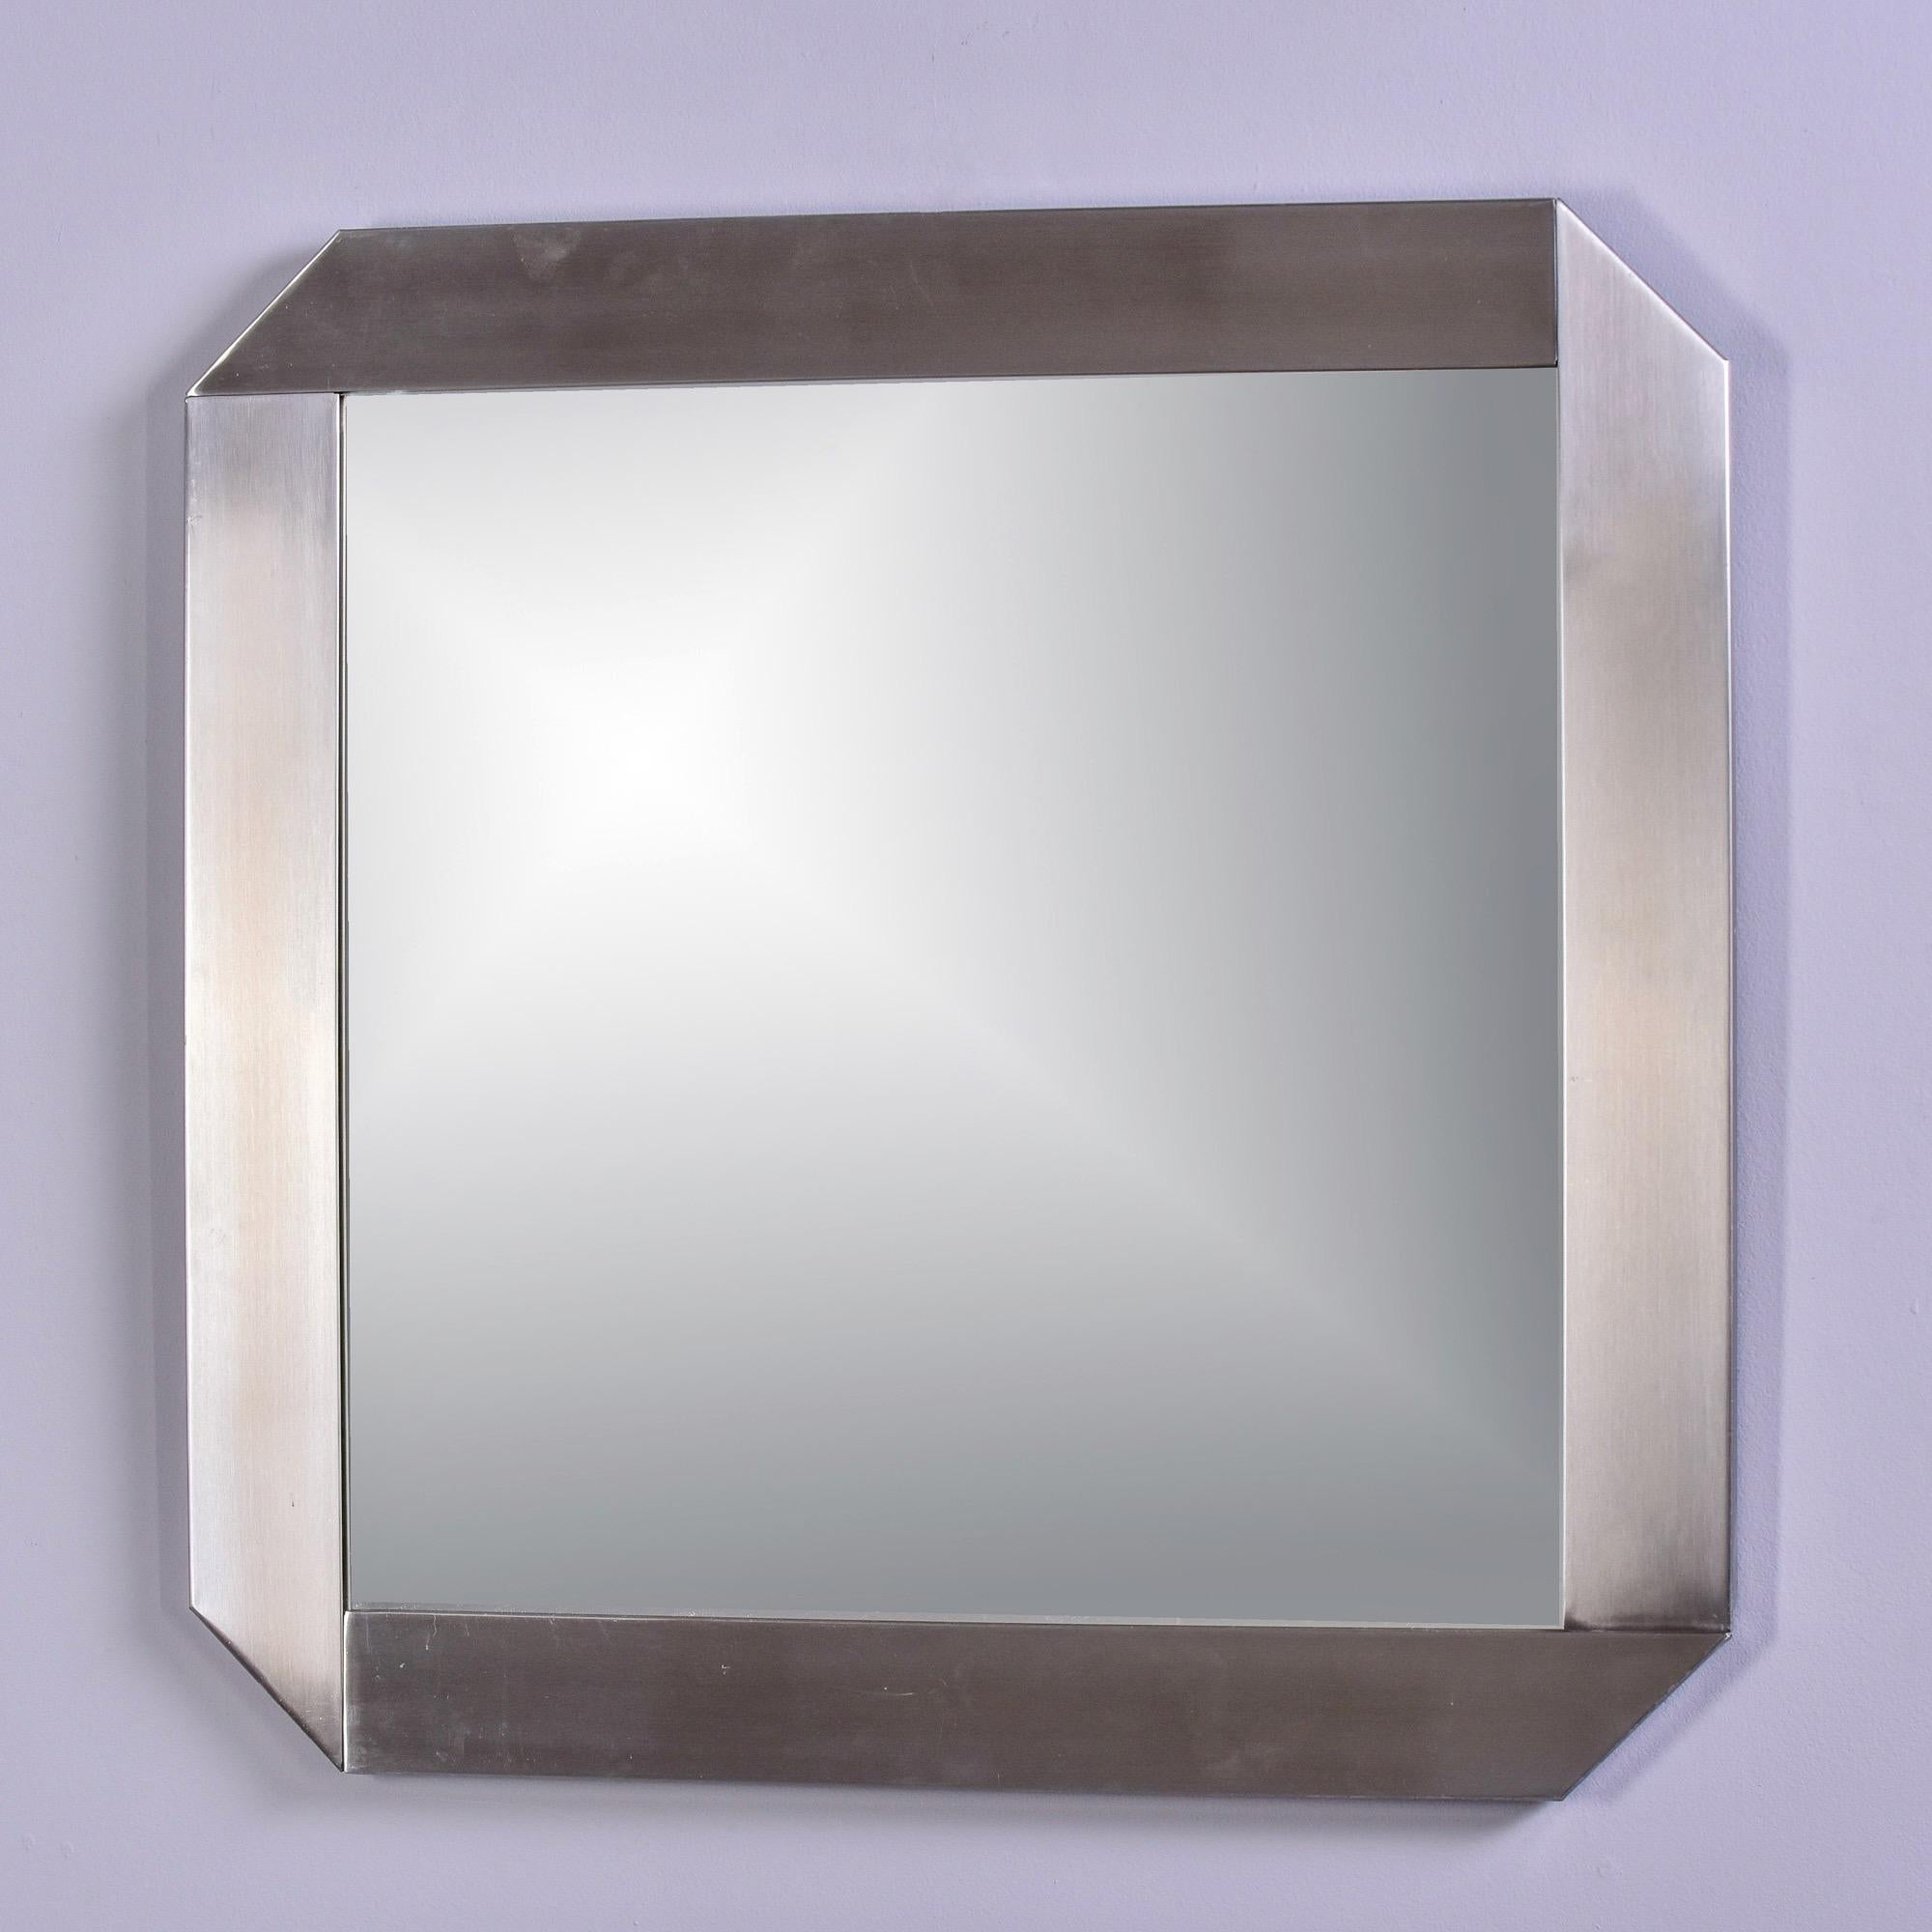 Found in France, this square mirror has a brushed steel frame and blunted corners. Unknown maker, no markings found. 

Very good vintage condition.